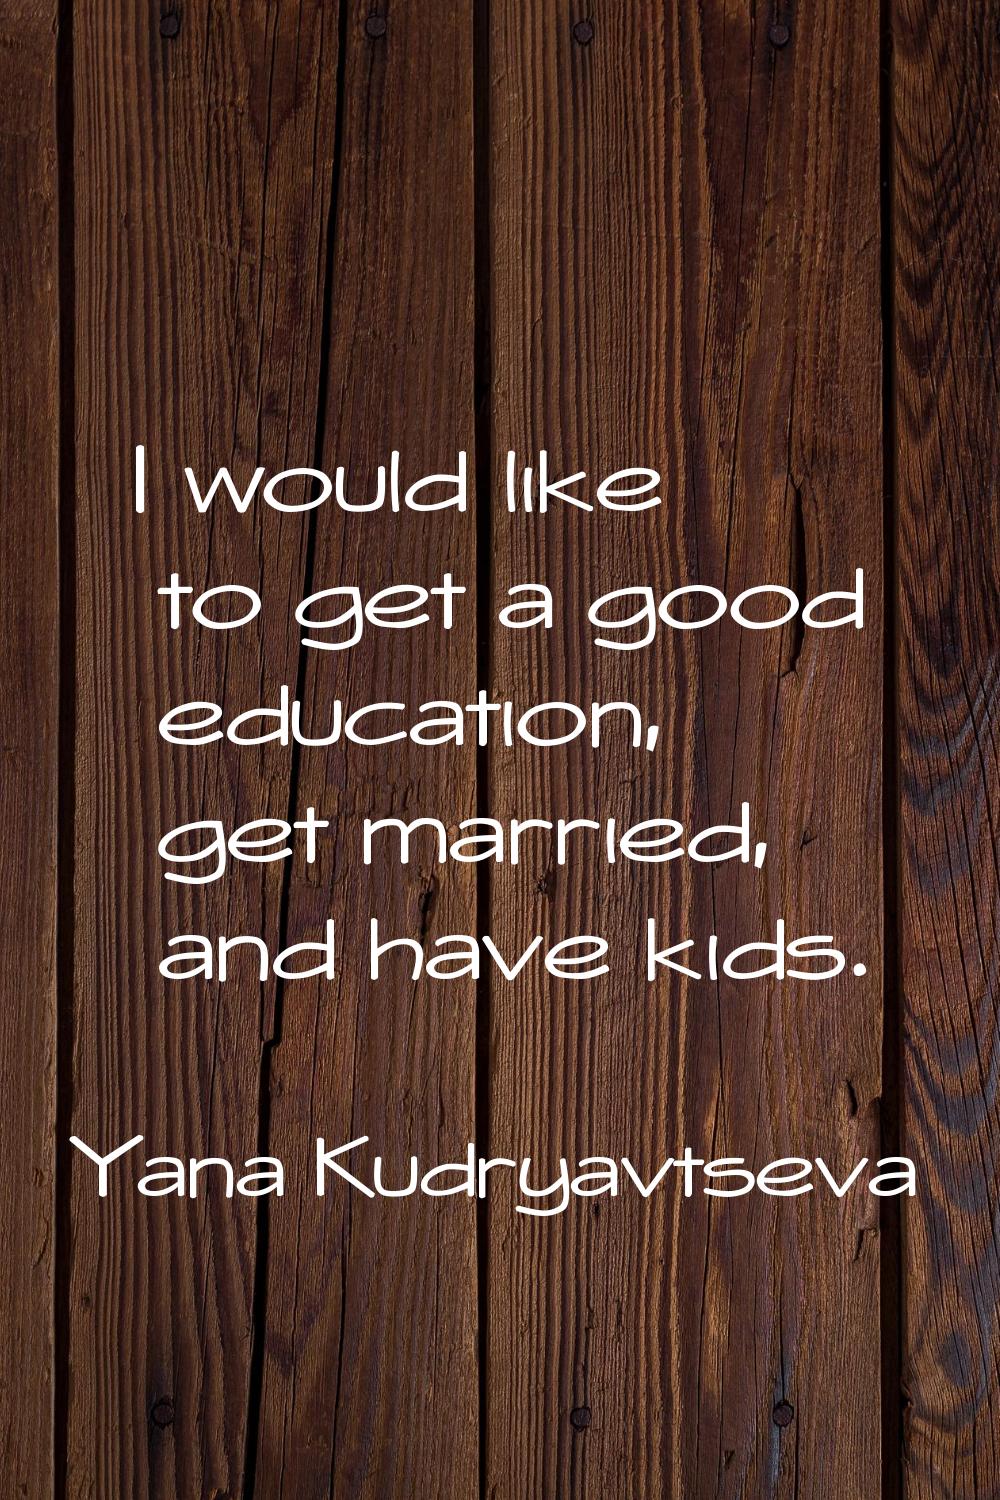 I would like to get a good education, get married, and have kids.